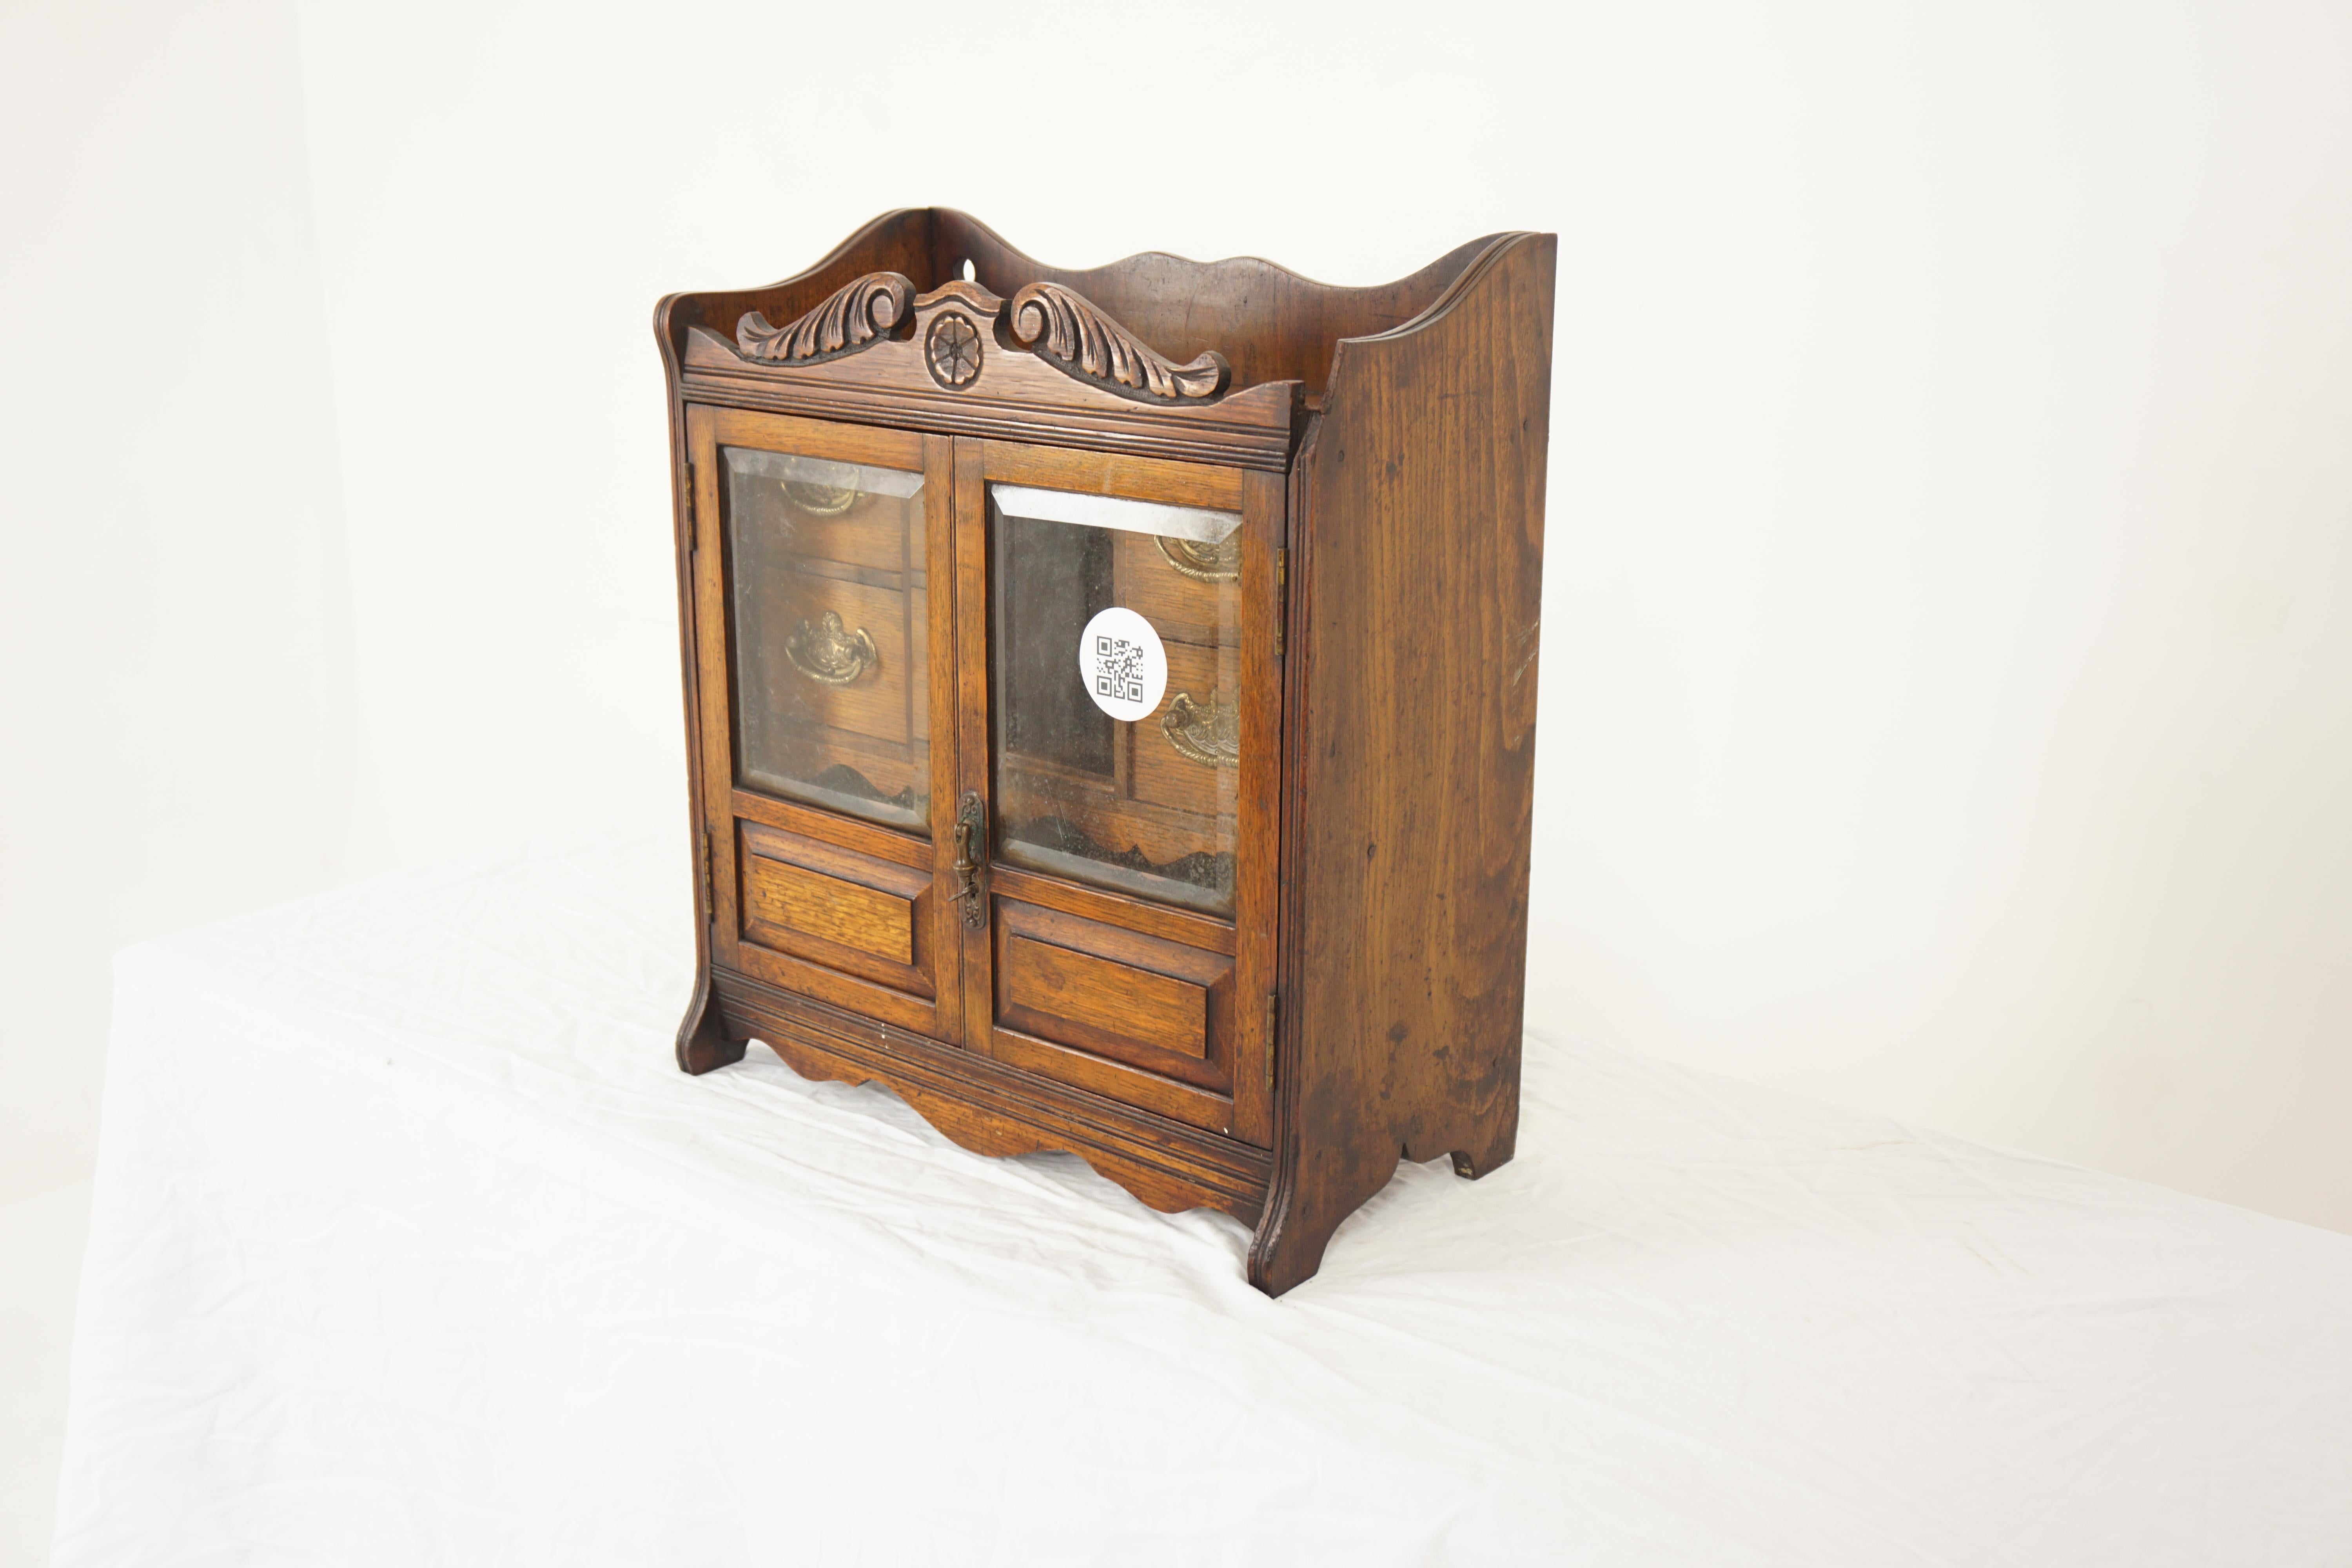 Arts & Crafts oak smokers cabinet, wall cabinet, Scotland 1900, H761

Scotland 1900
Solid oak
Original finish
Shaped gallery on the top with finials
Pair of original glass doors open to reveal fitted interior with shelves and drawers
All